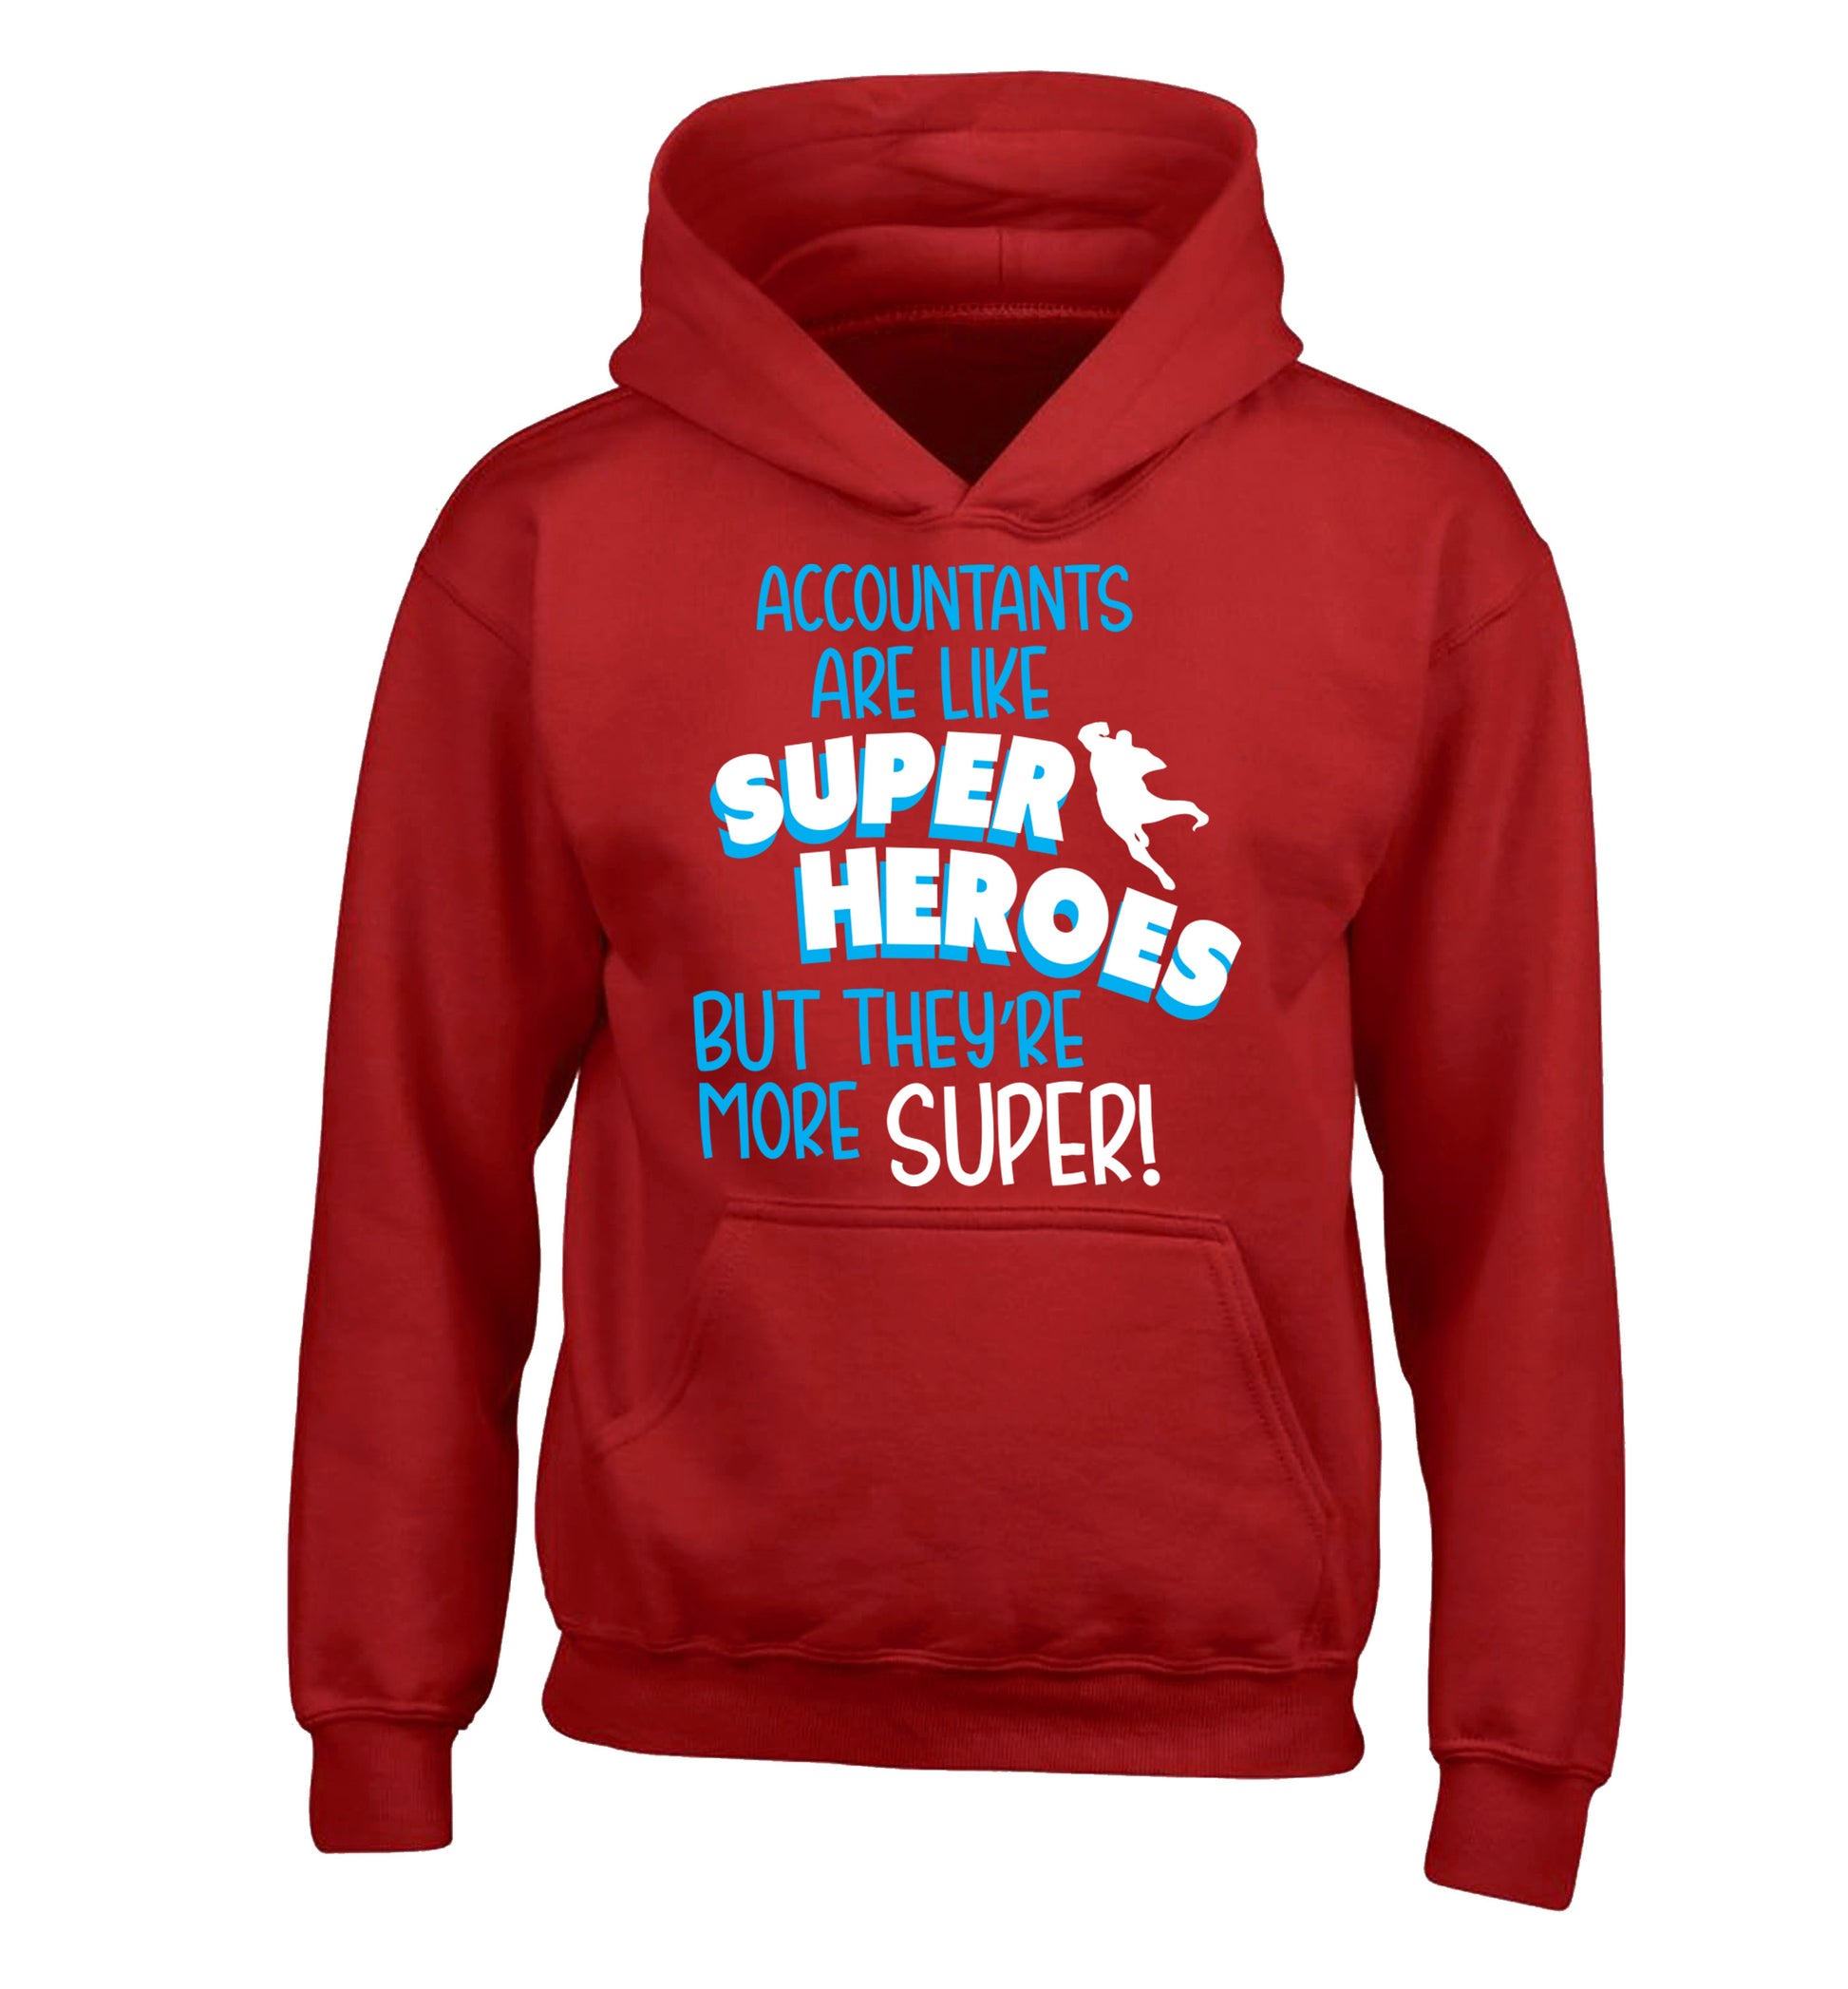 Accountants are like superheroes but they're more super children's red hoodie 12-13 Years